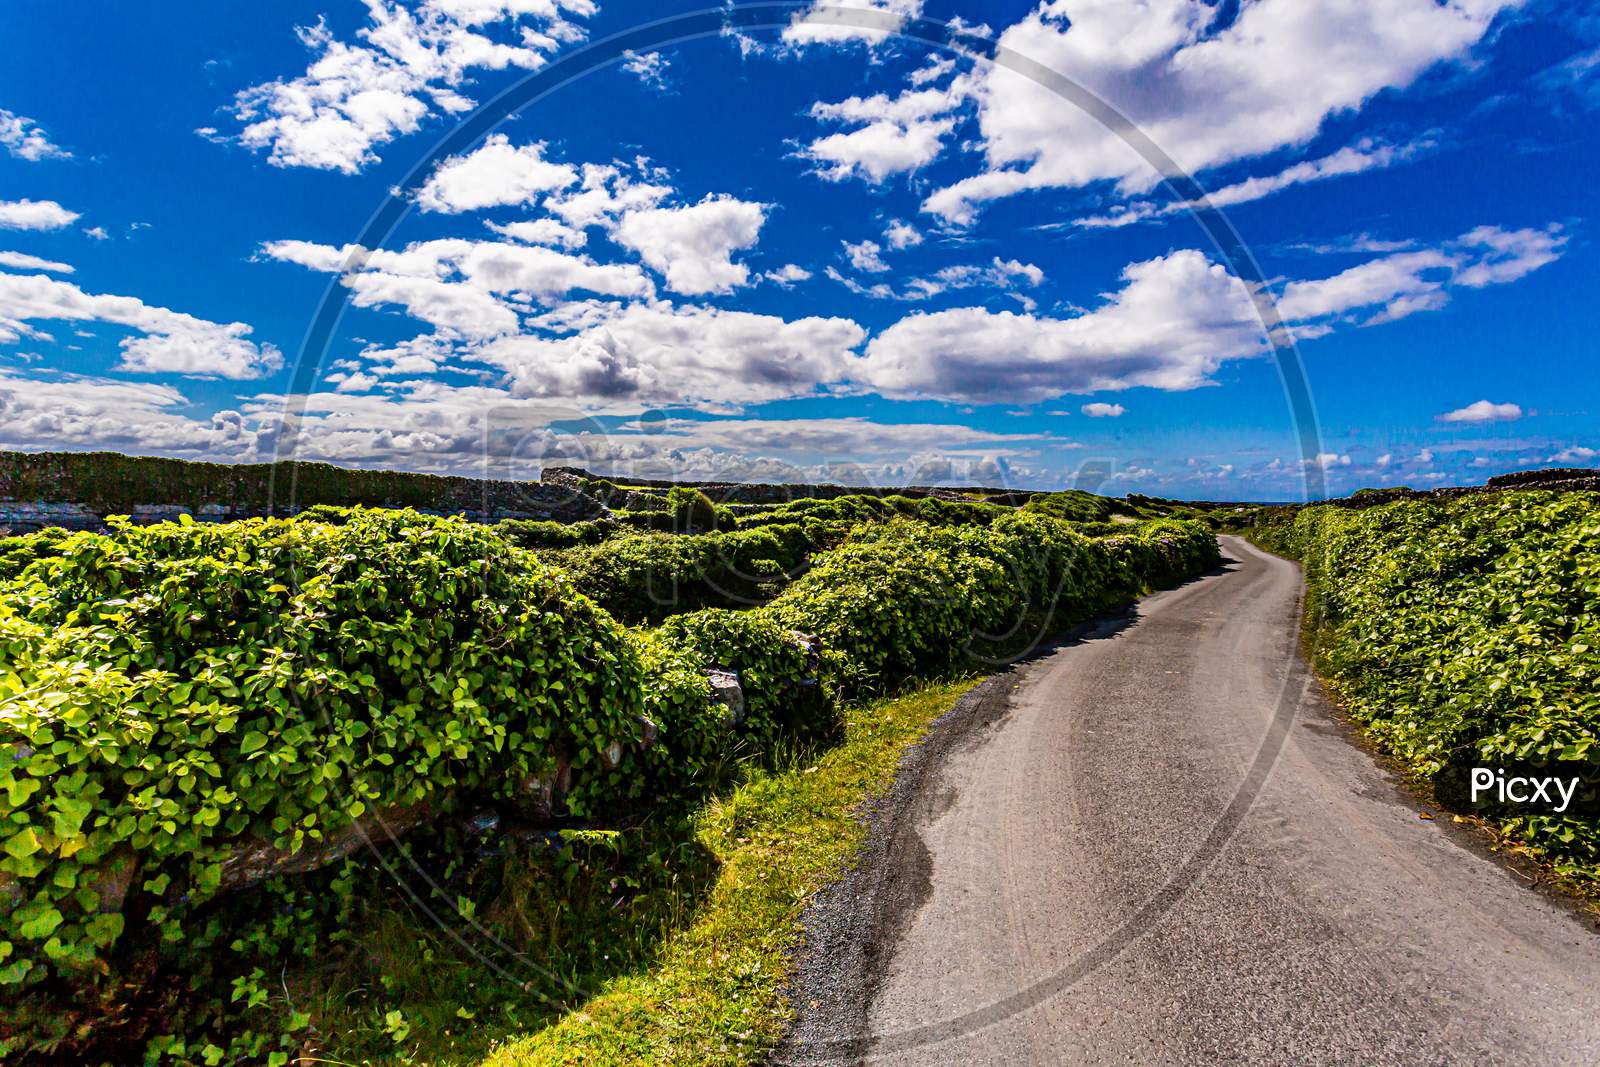 Beautiful View Of A Rural Road Between Limestone Fences Covered With Greenery On Inis Oirr Island, Wonderful Sunny Day With A Blue Sky And White Clouds On Inisheer Island, Aran Islands, Ireland